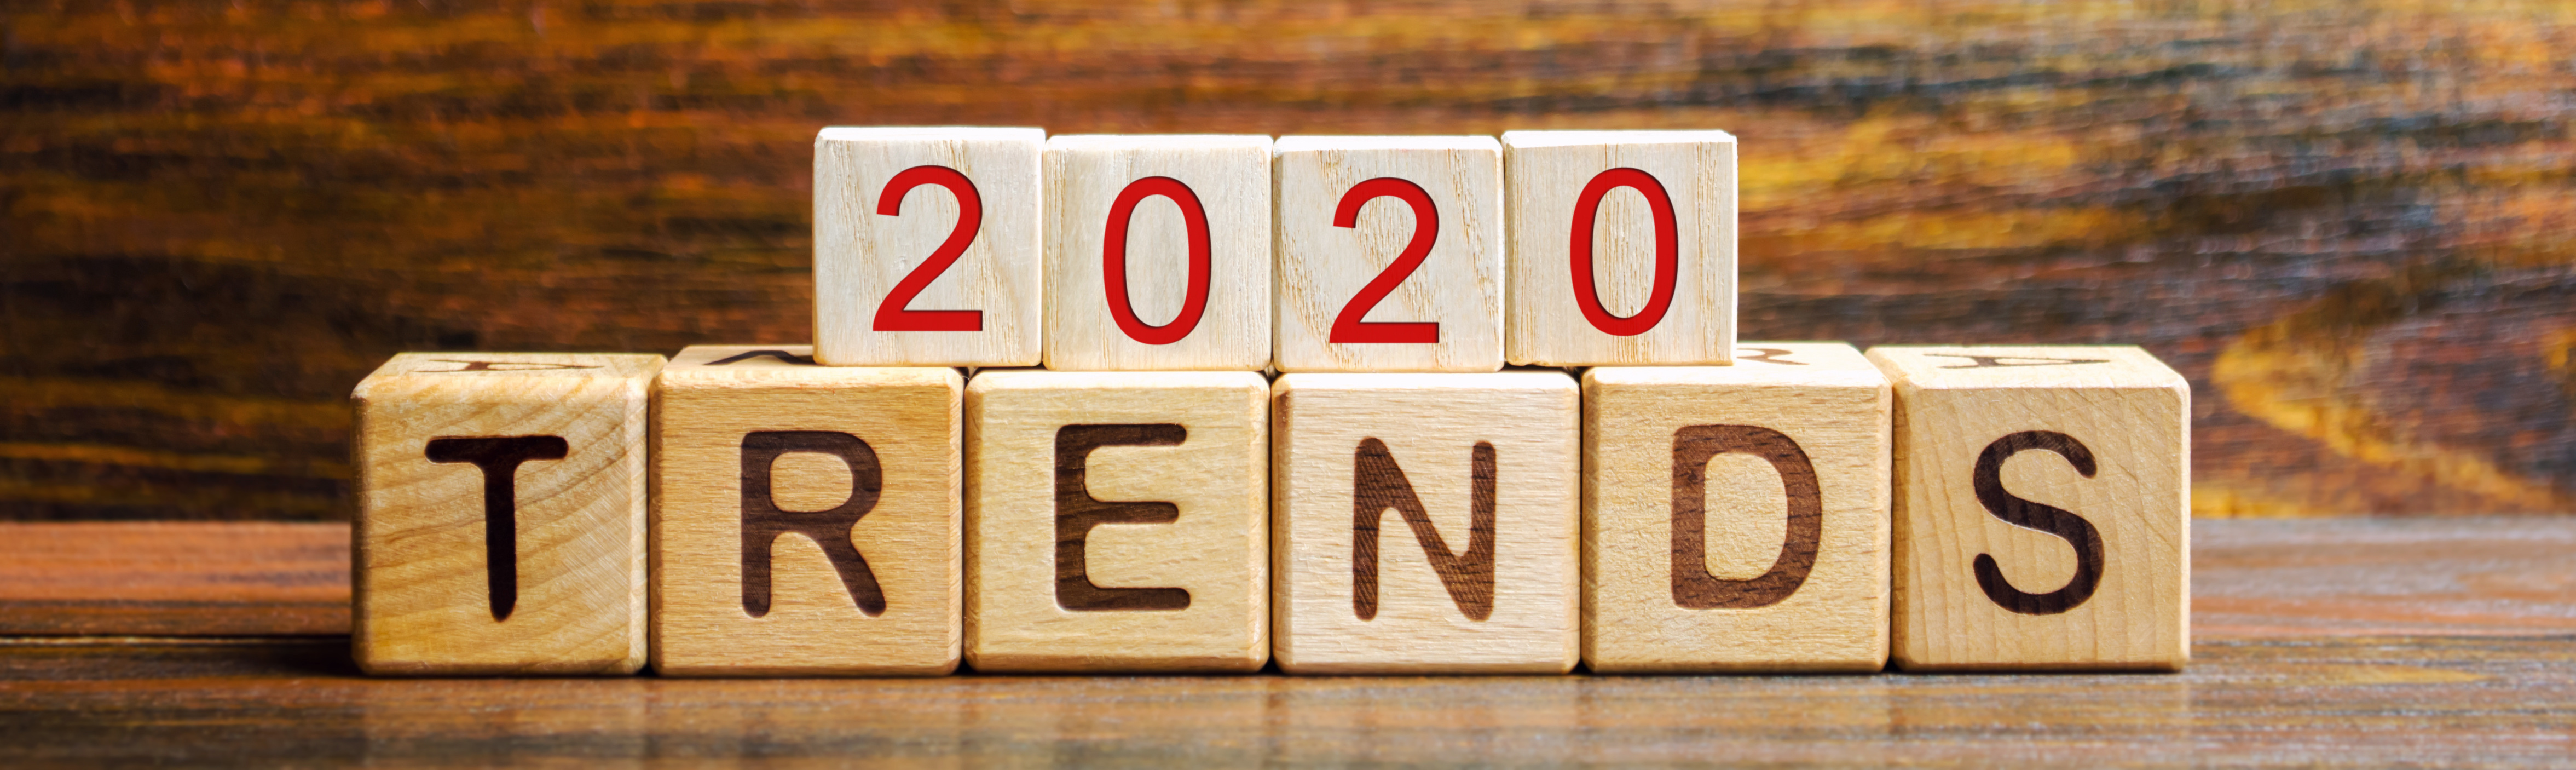 5 Top Real Estate Marketing Trends for 2020